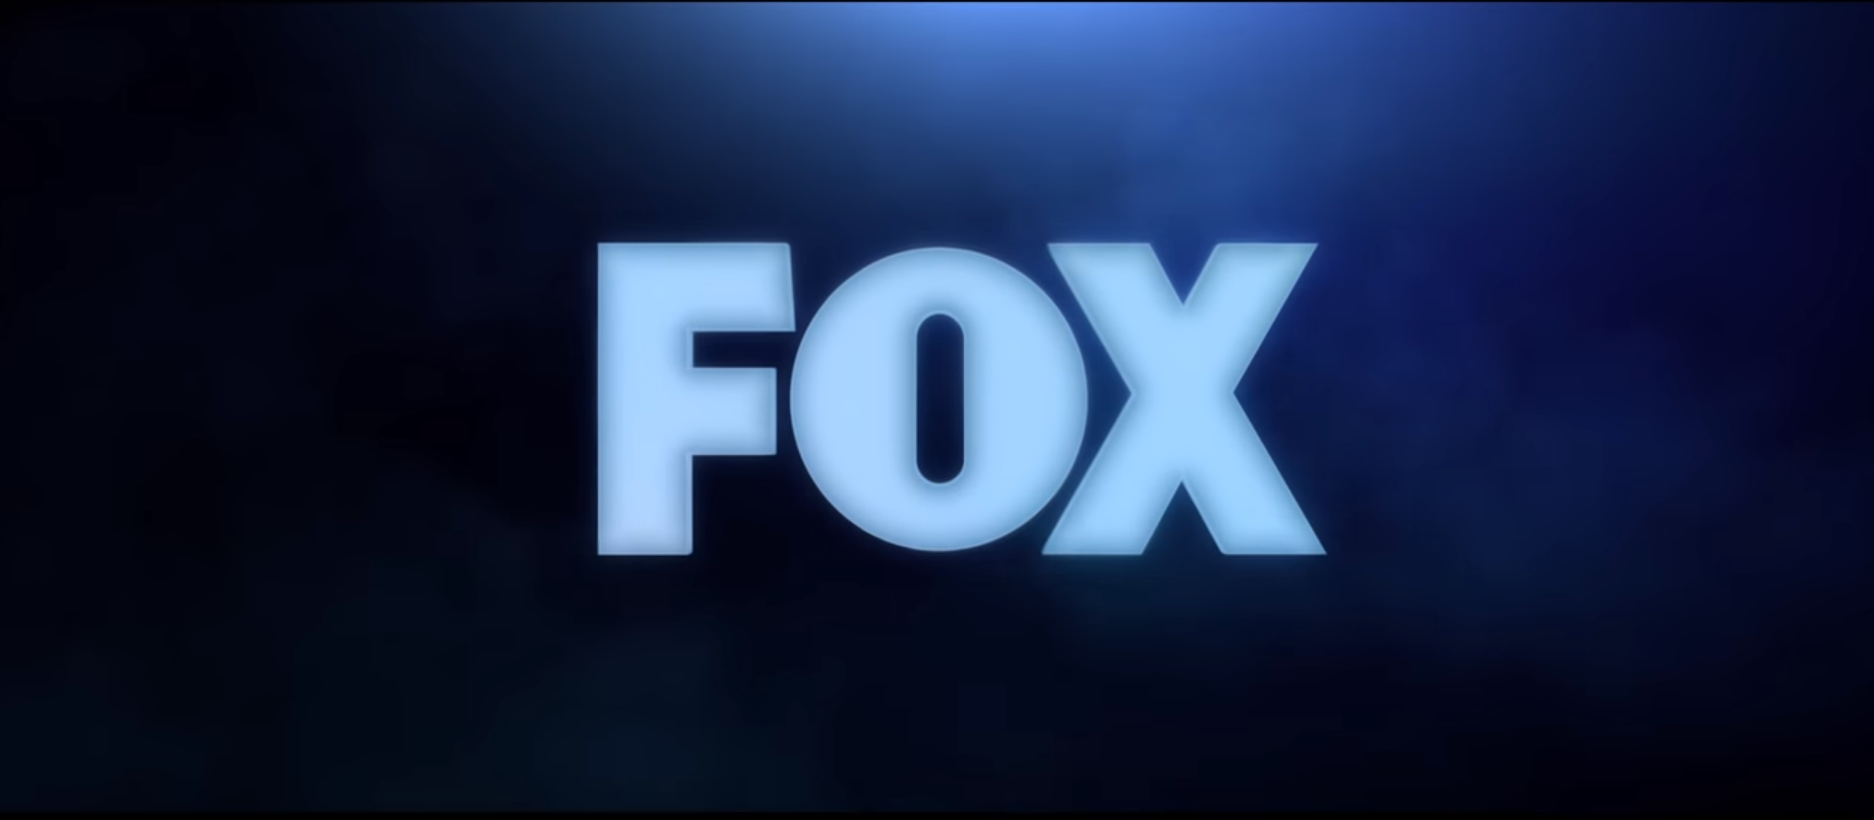 #Doc: Casting Revealed for New Medical Drama Series on FOX